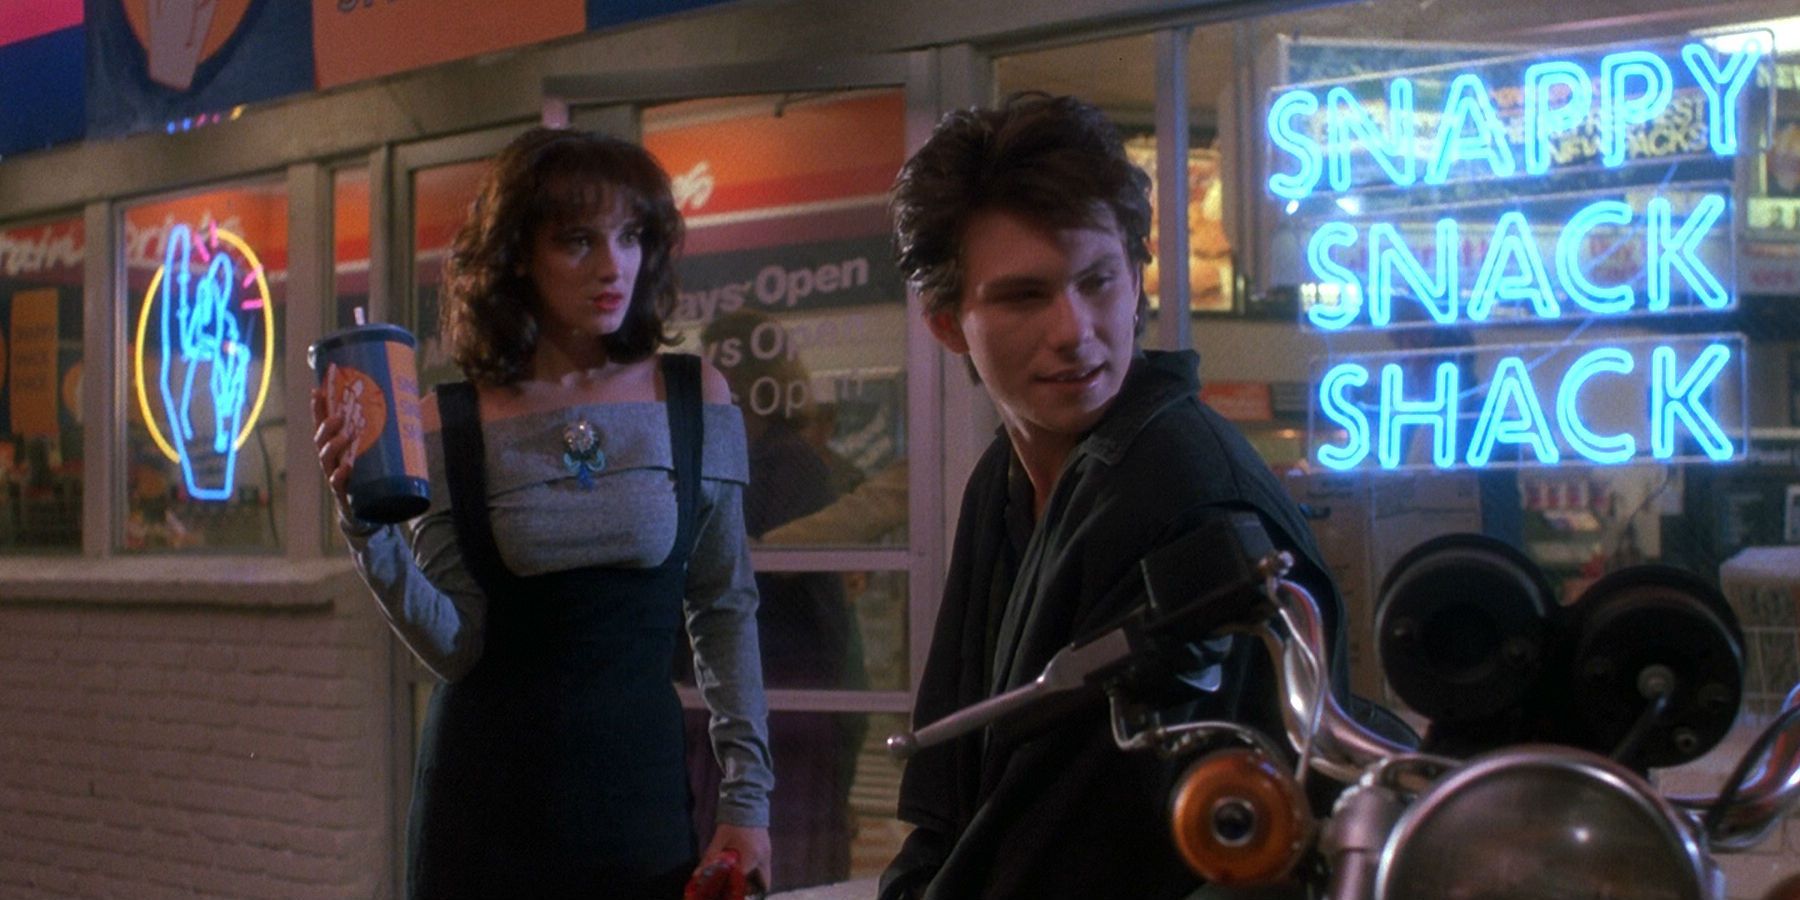 Winona Ryder and Christian Slater outside restaurant in Heathers